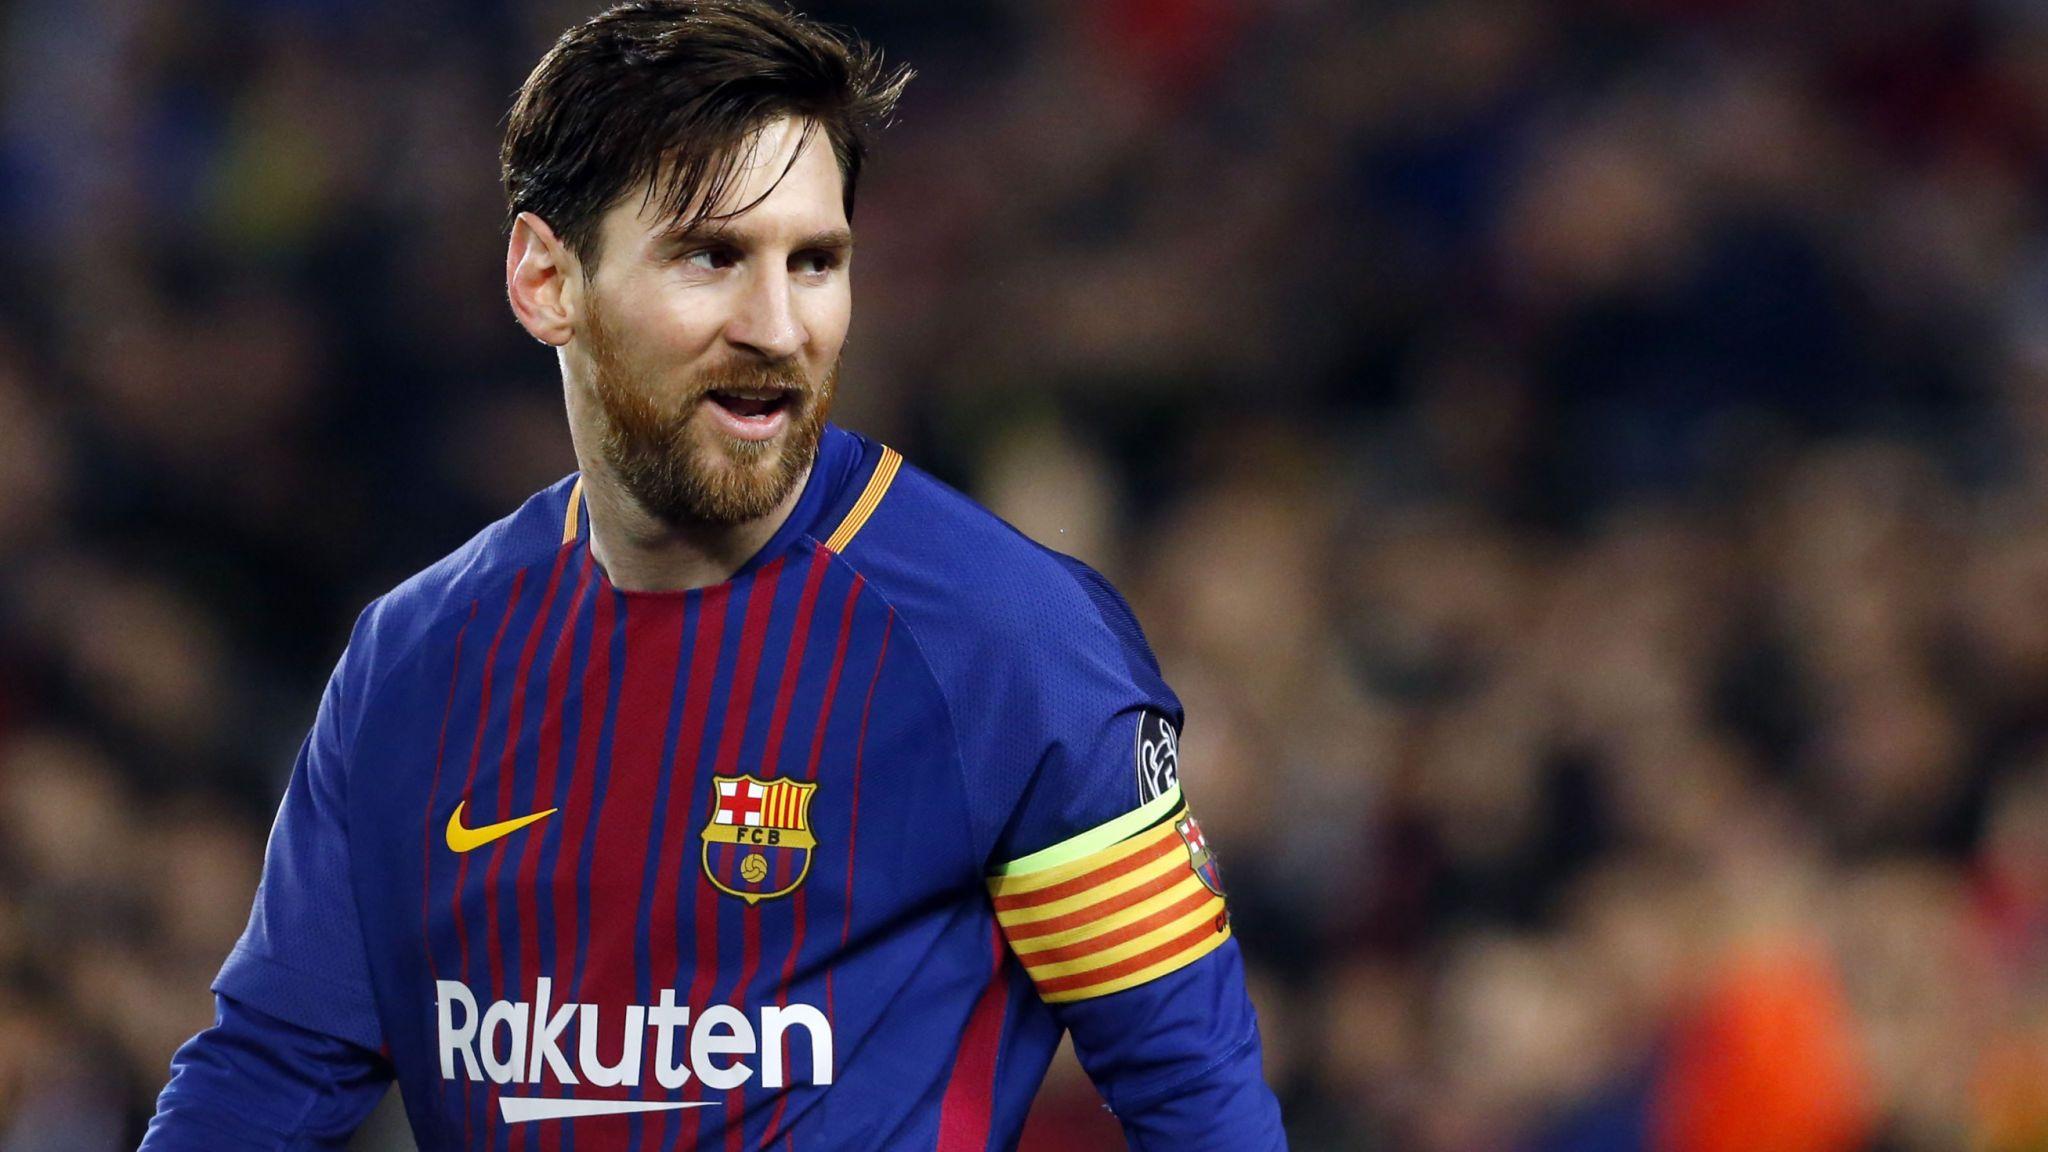 Barcelona to continue paying Messi until 2025 even if he leaves this summer